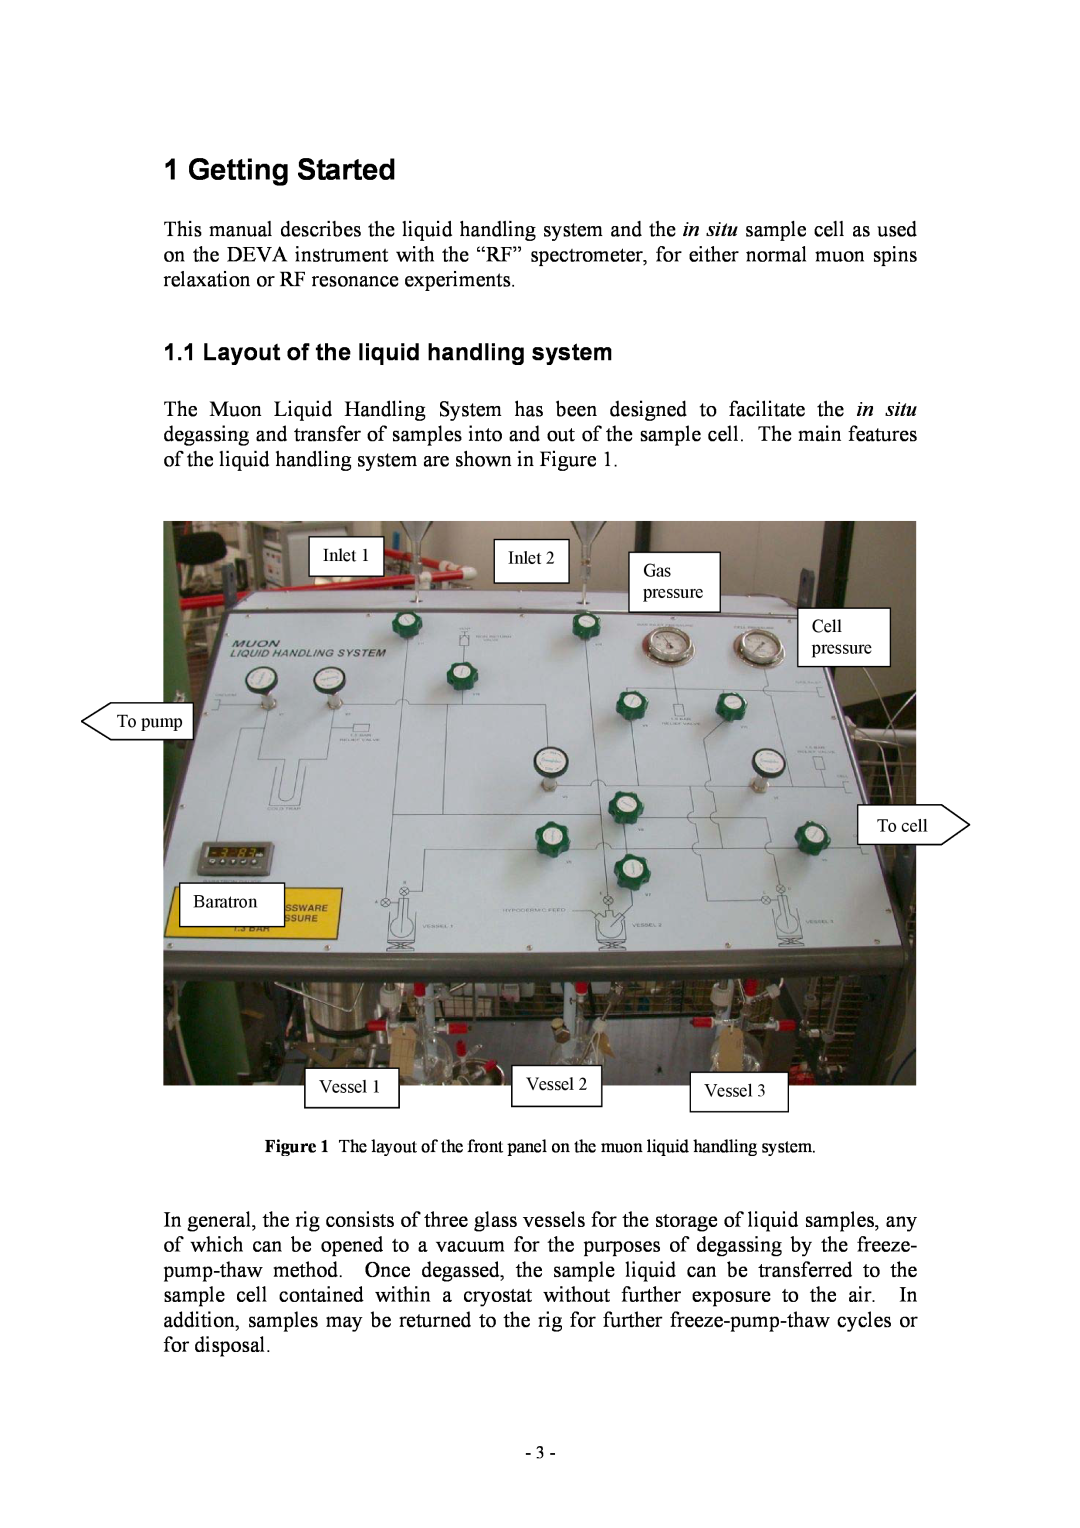 Boca Research None manual Getting Started, Layout of the liquid handling system 